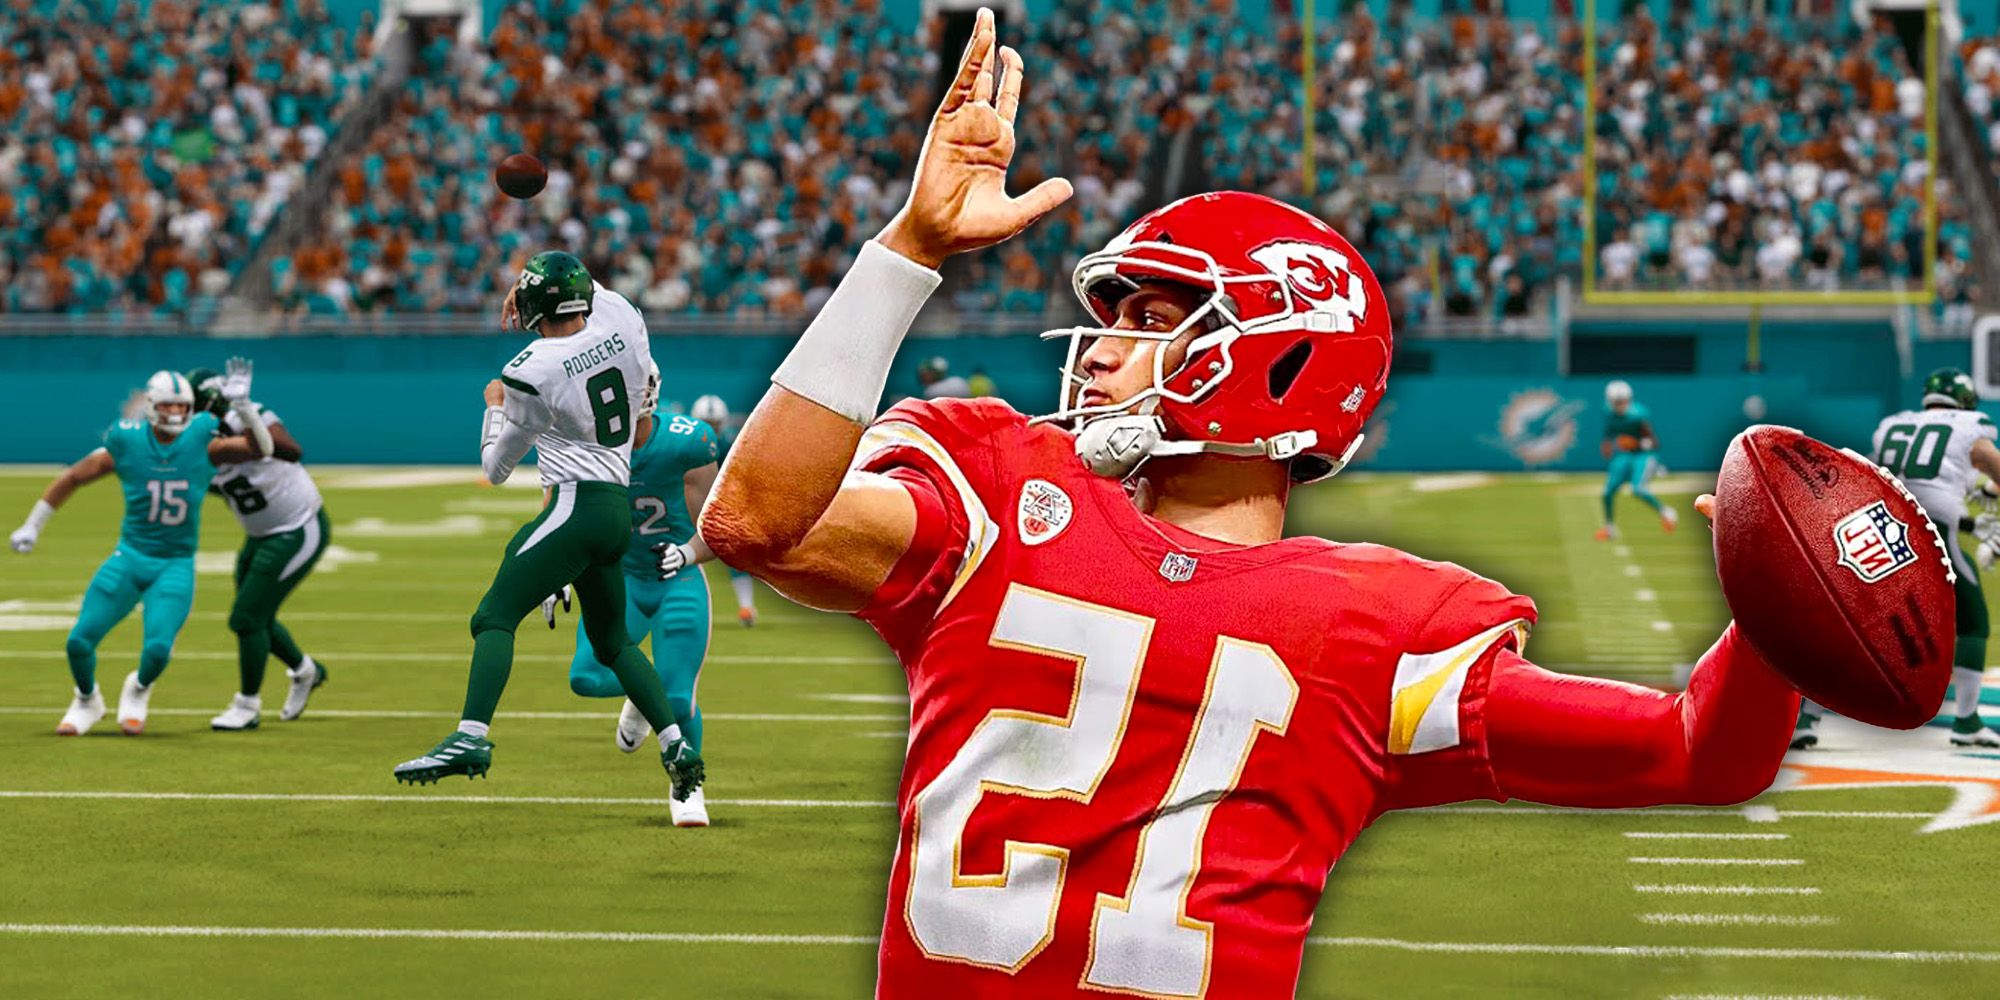 Patrick Mahomes, #15 on the KC Chiefs, winds up a pass